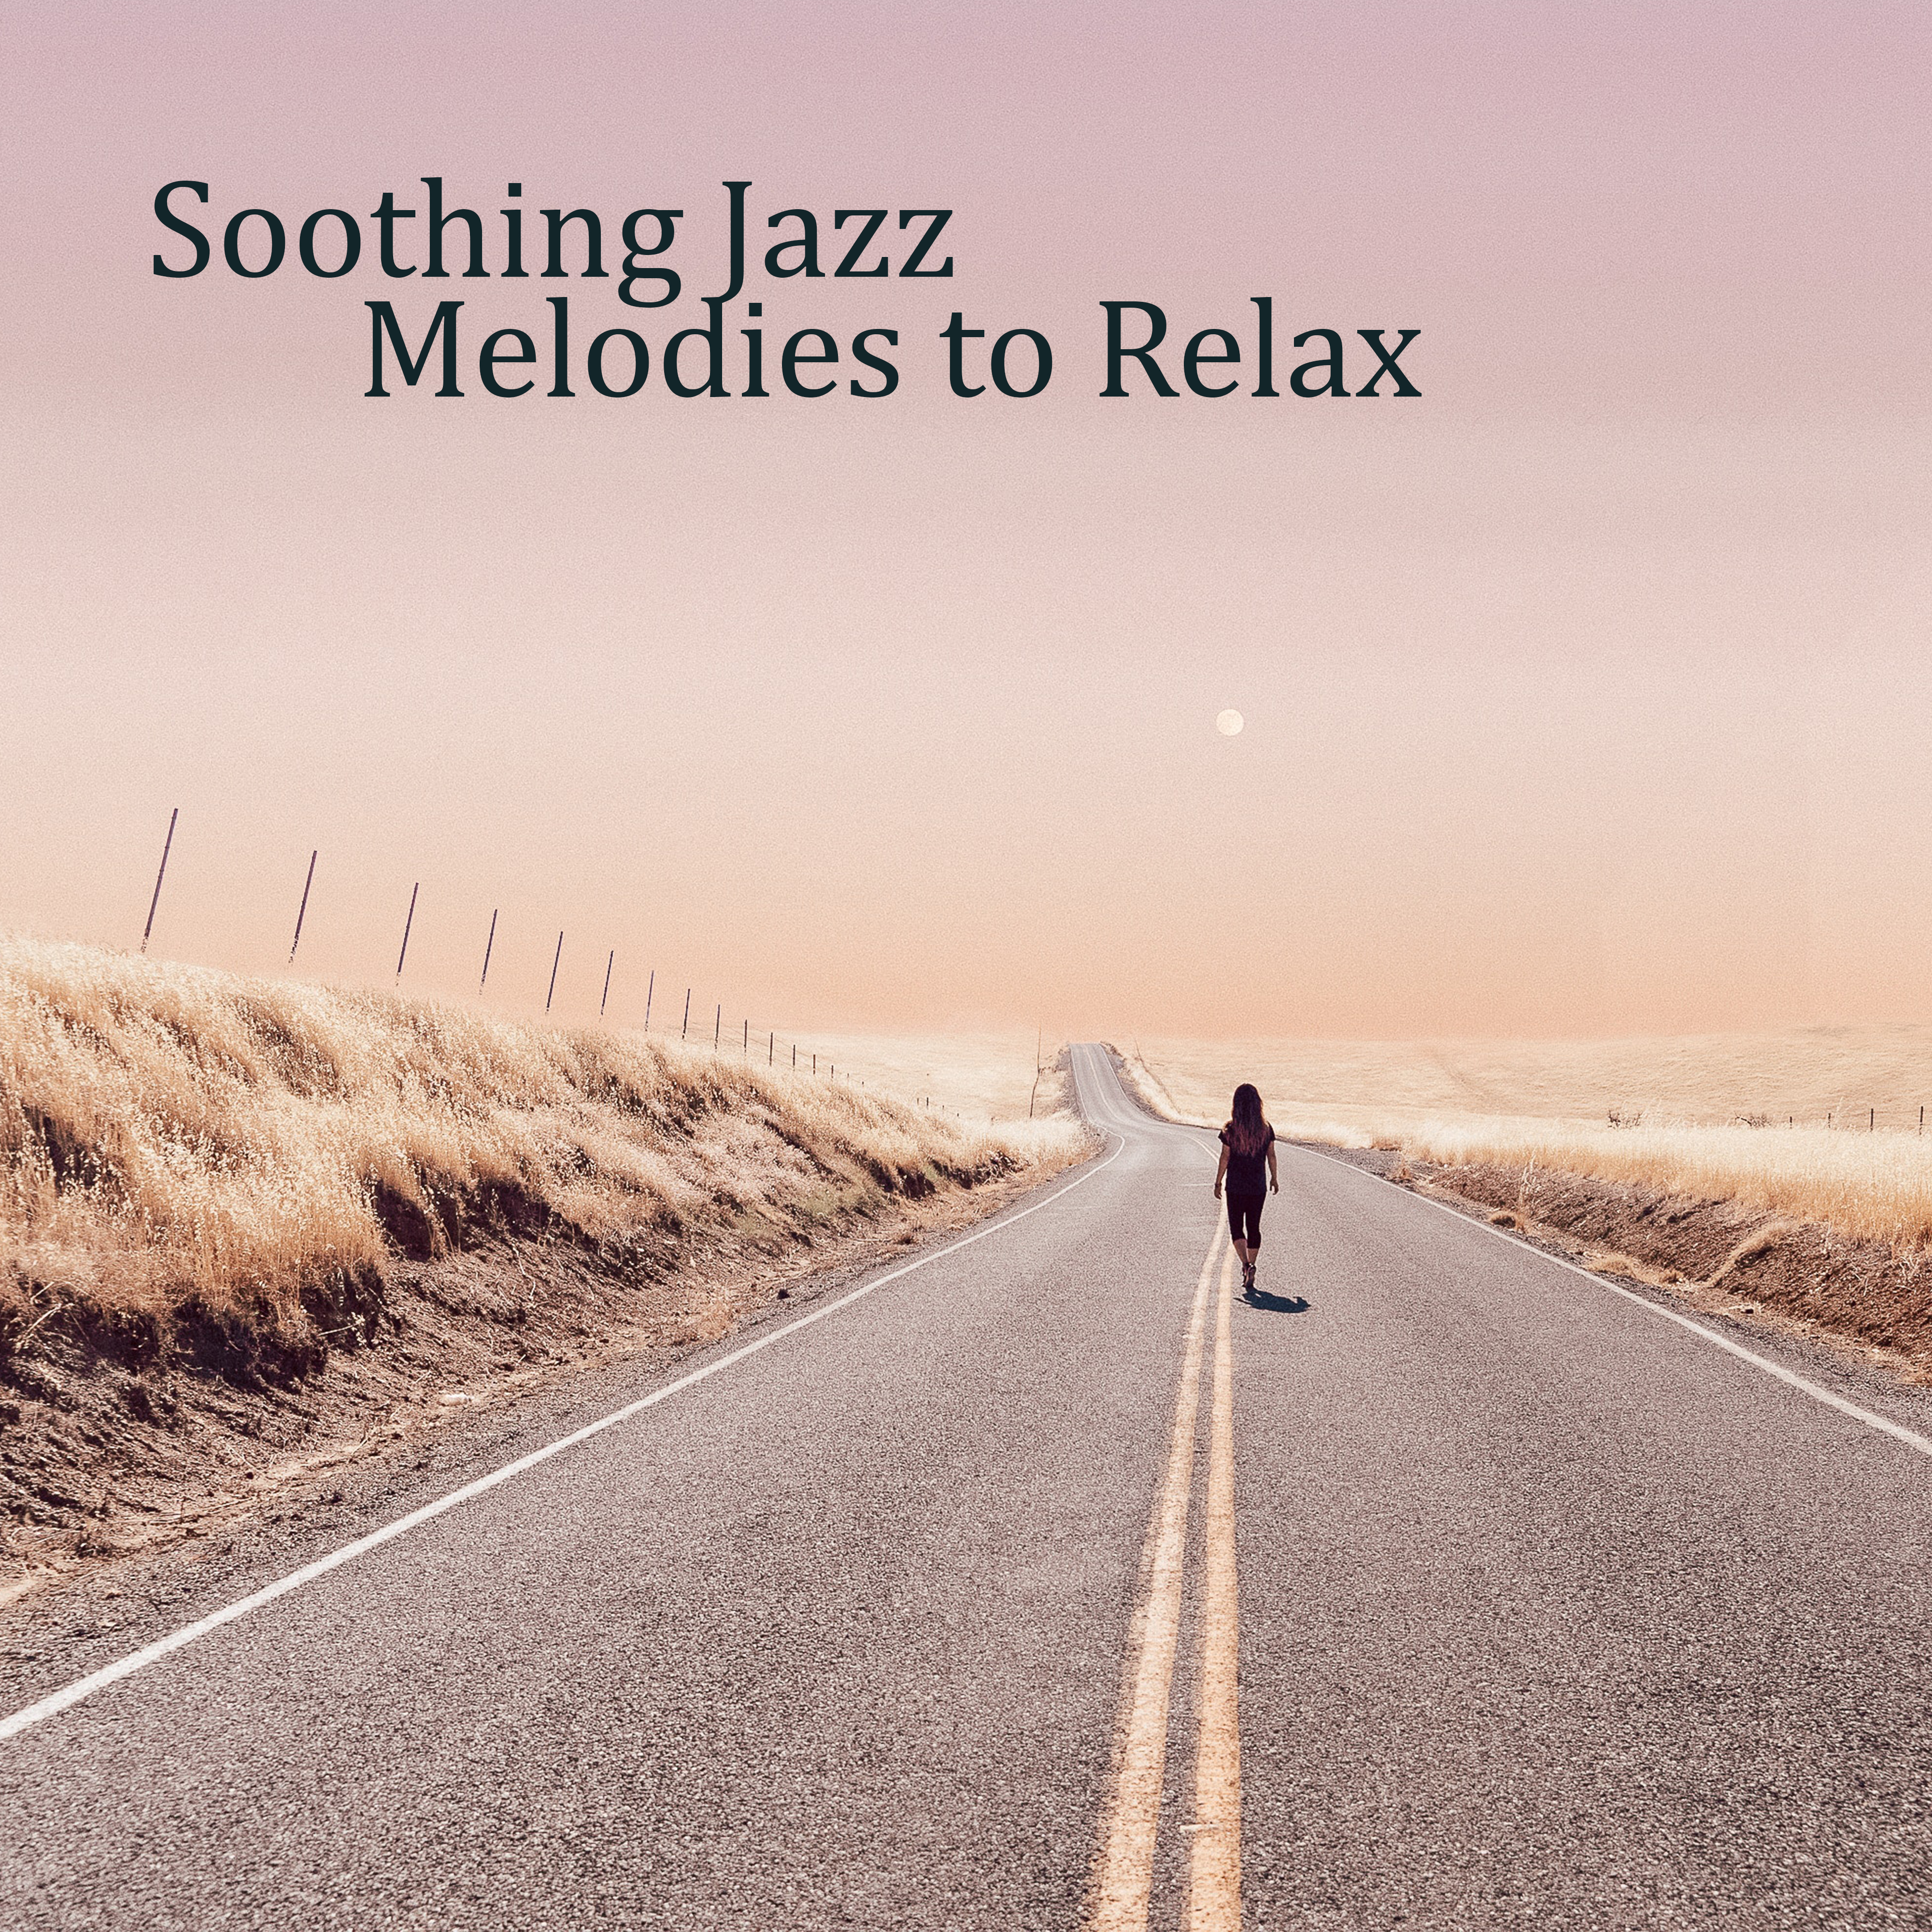 Soothing Jazz Melodies to Relax